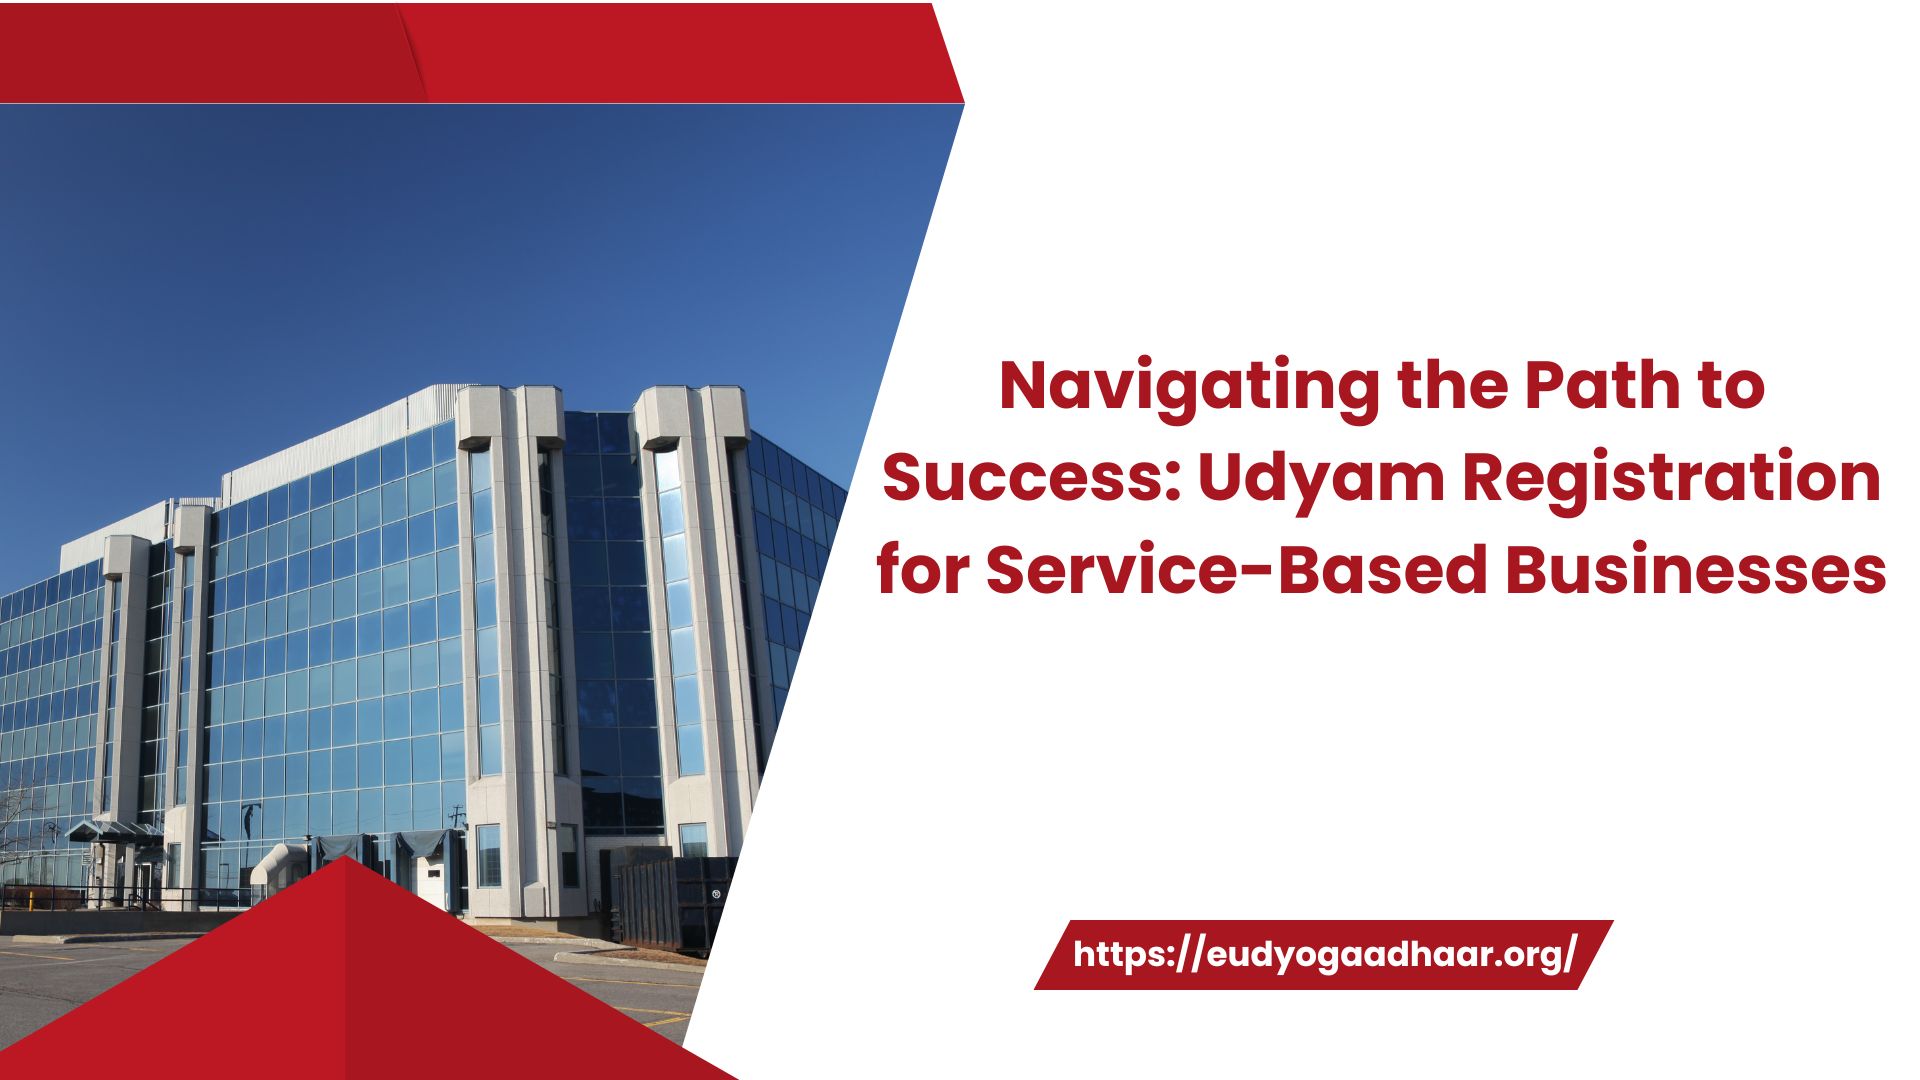 Navigating the Path to Success: Udyam Registration for Service-Based Businesses